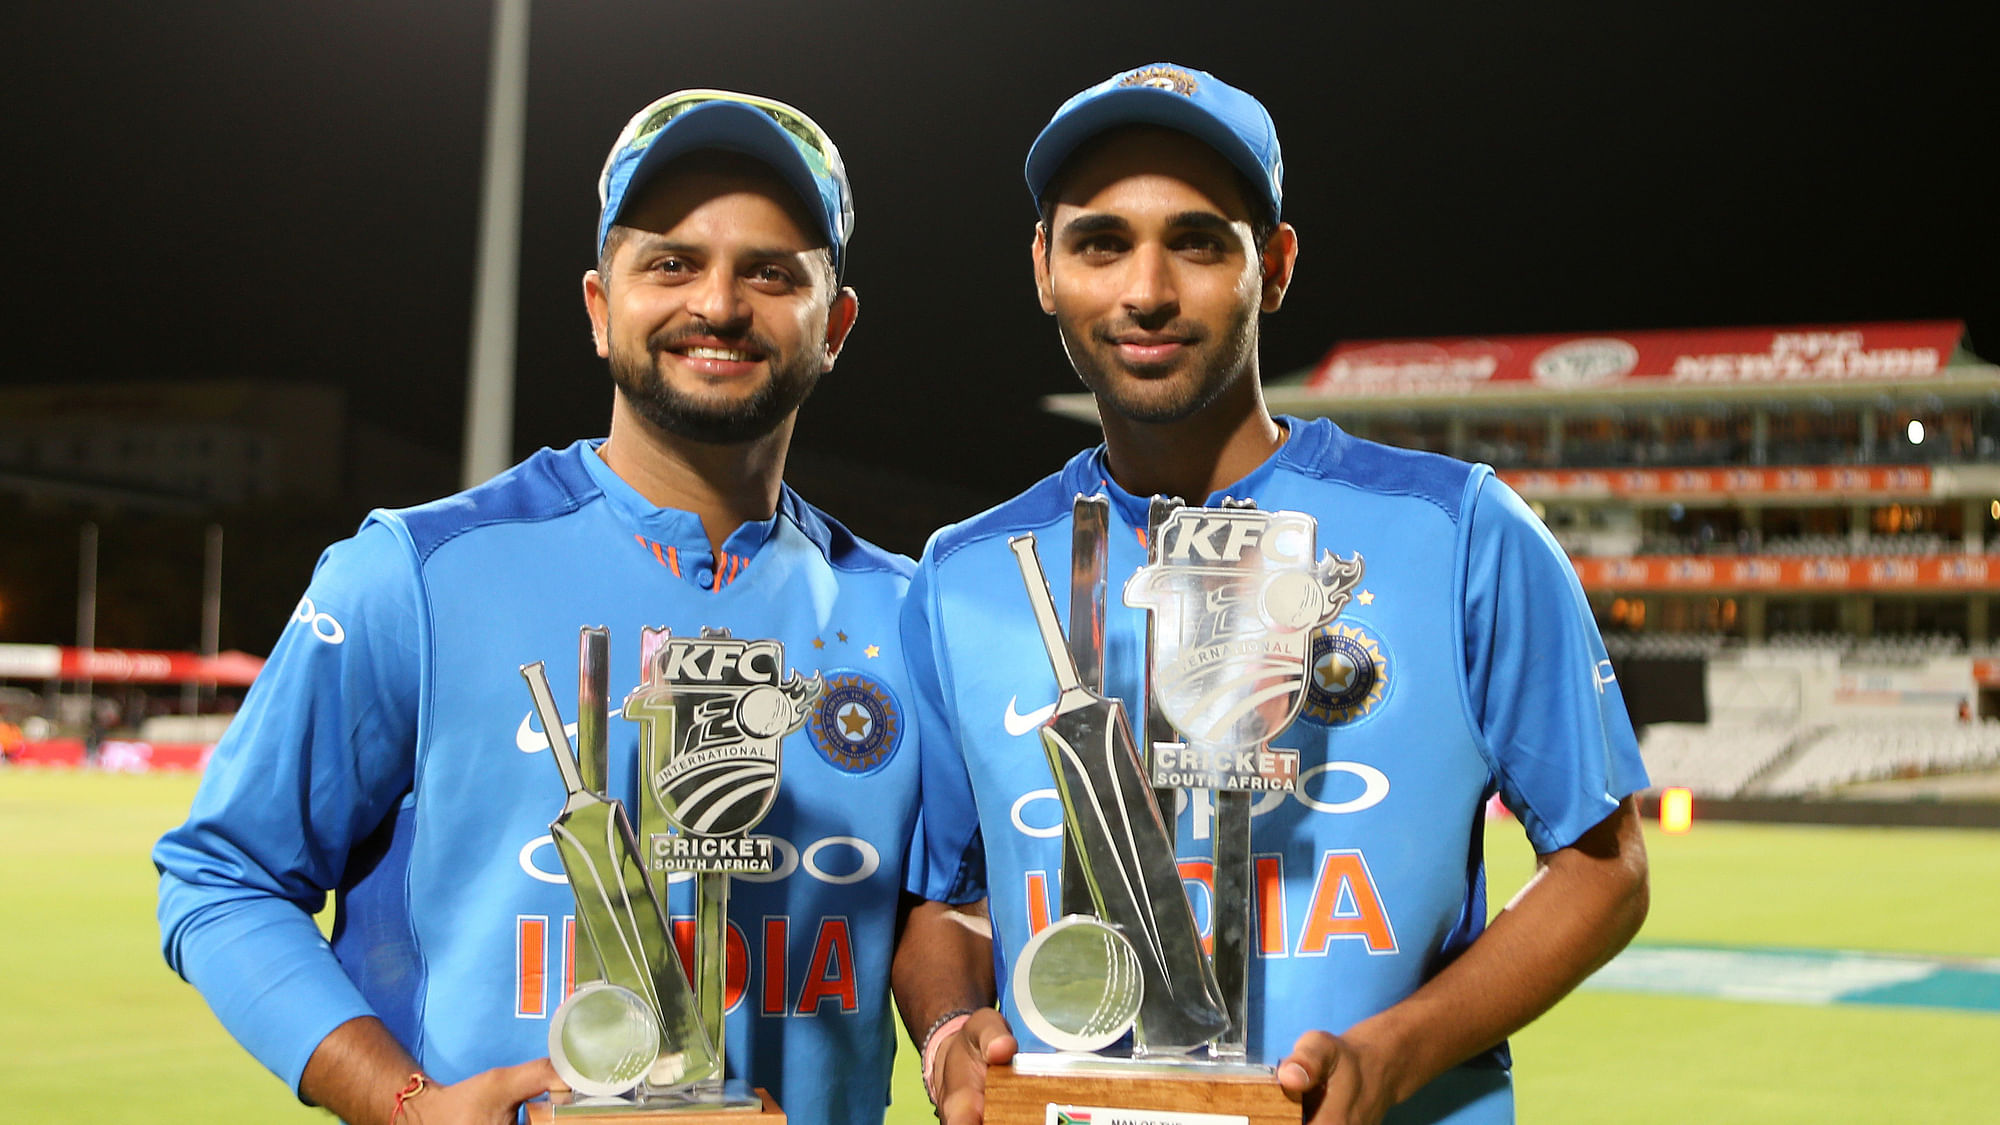 Suresh Raina hit 43 off 27 balls and took one wicket for 27 runs while Bhuvneshwar Kumar took two wickets in the final and third T20I against South Africa in Cape Town.